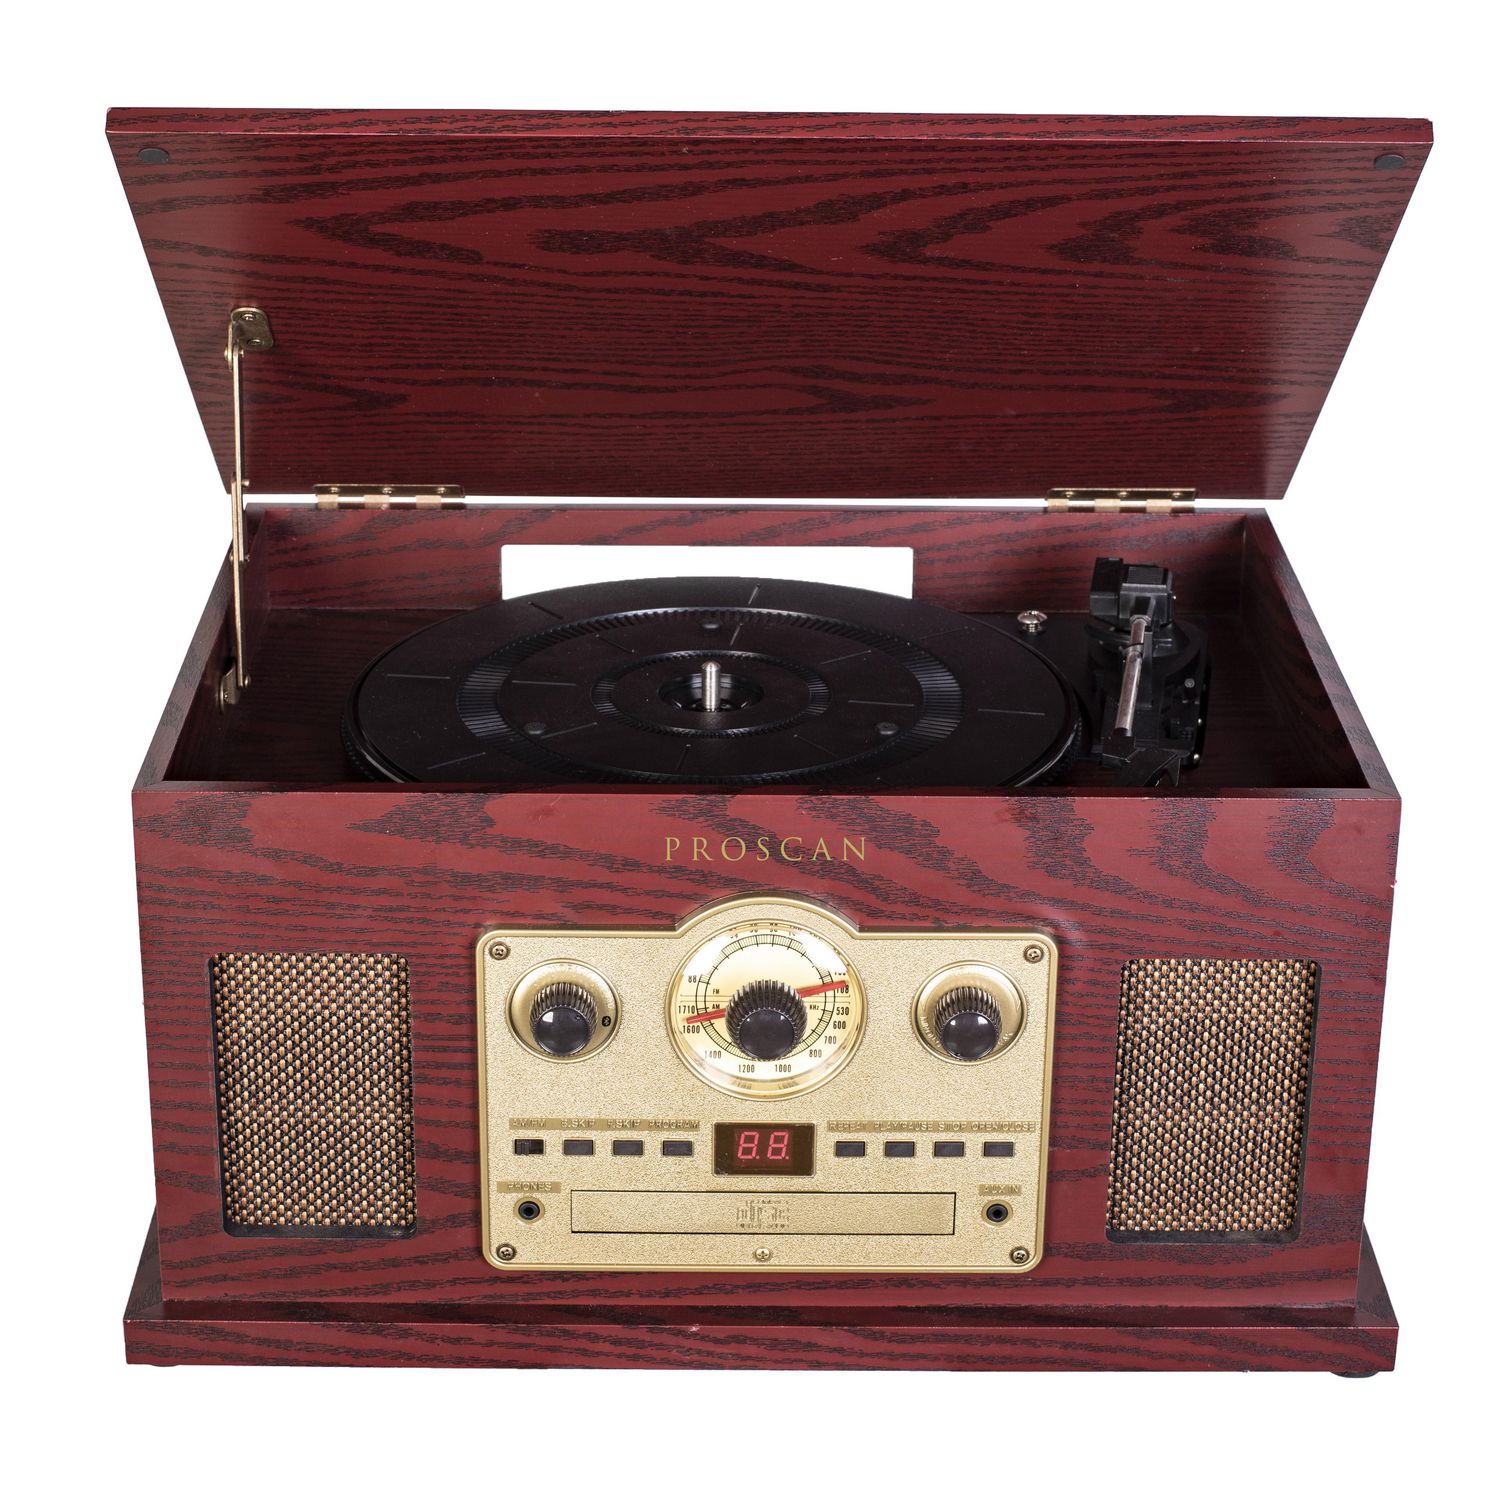 Nostalgic　and　AM/FM　Bluetooth　Cassette,　Proscan　CD,　with　AUX　6-in-1　Brown　Turntable　Radio